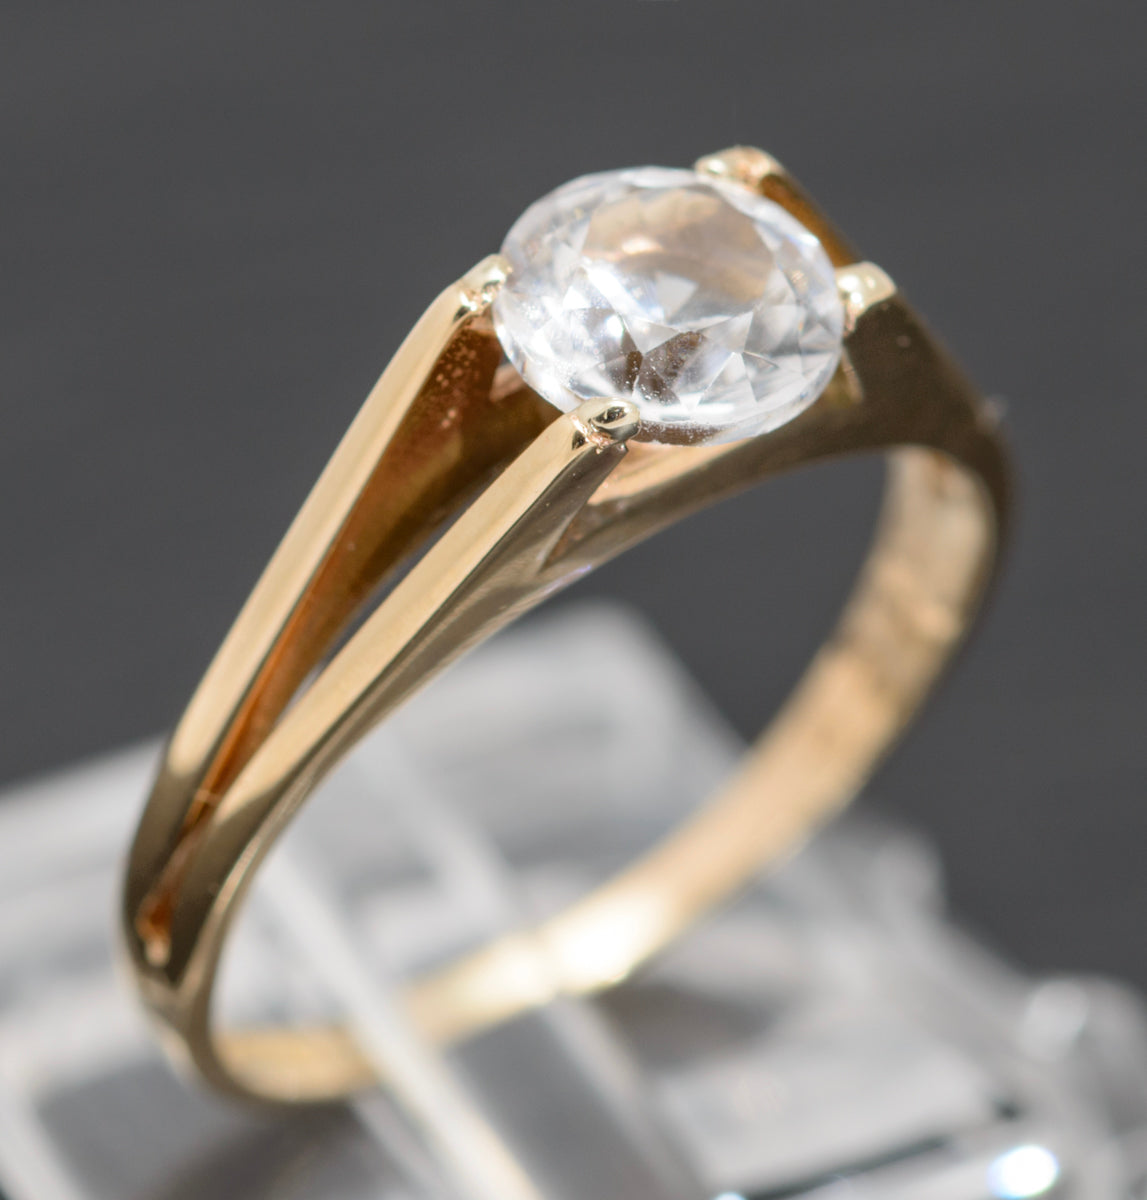 Vintage 9ct Gold & White Spinel Solitaire Ring London Hallmark 1973 Size K1/2 (A1615)